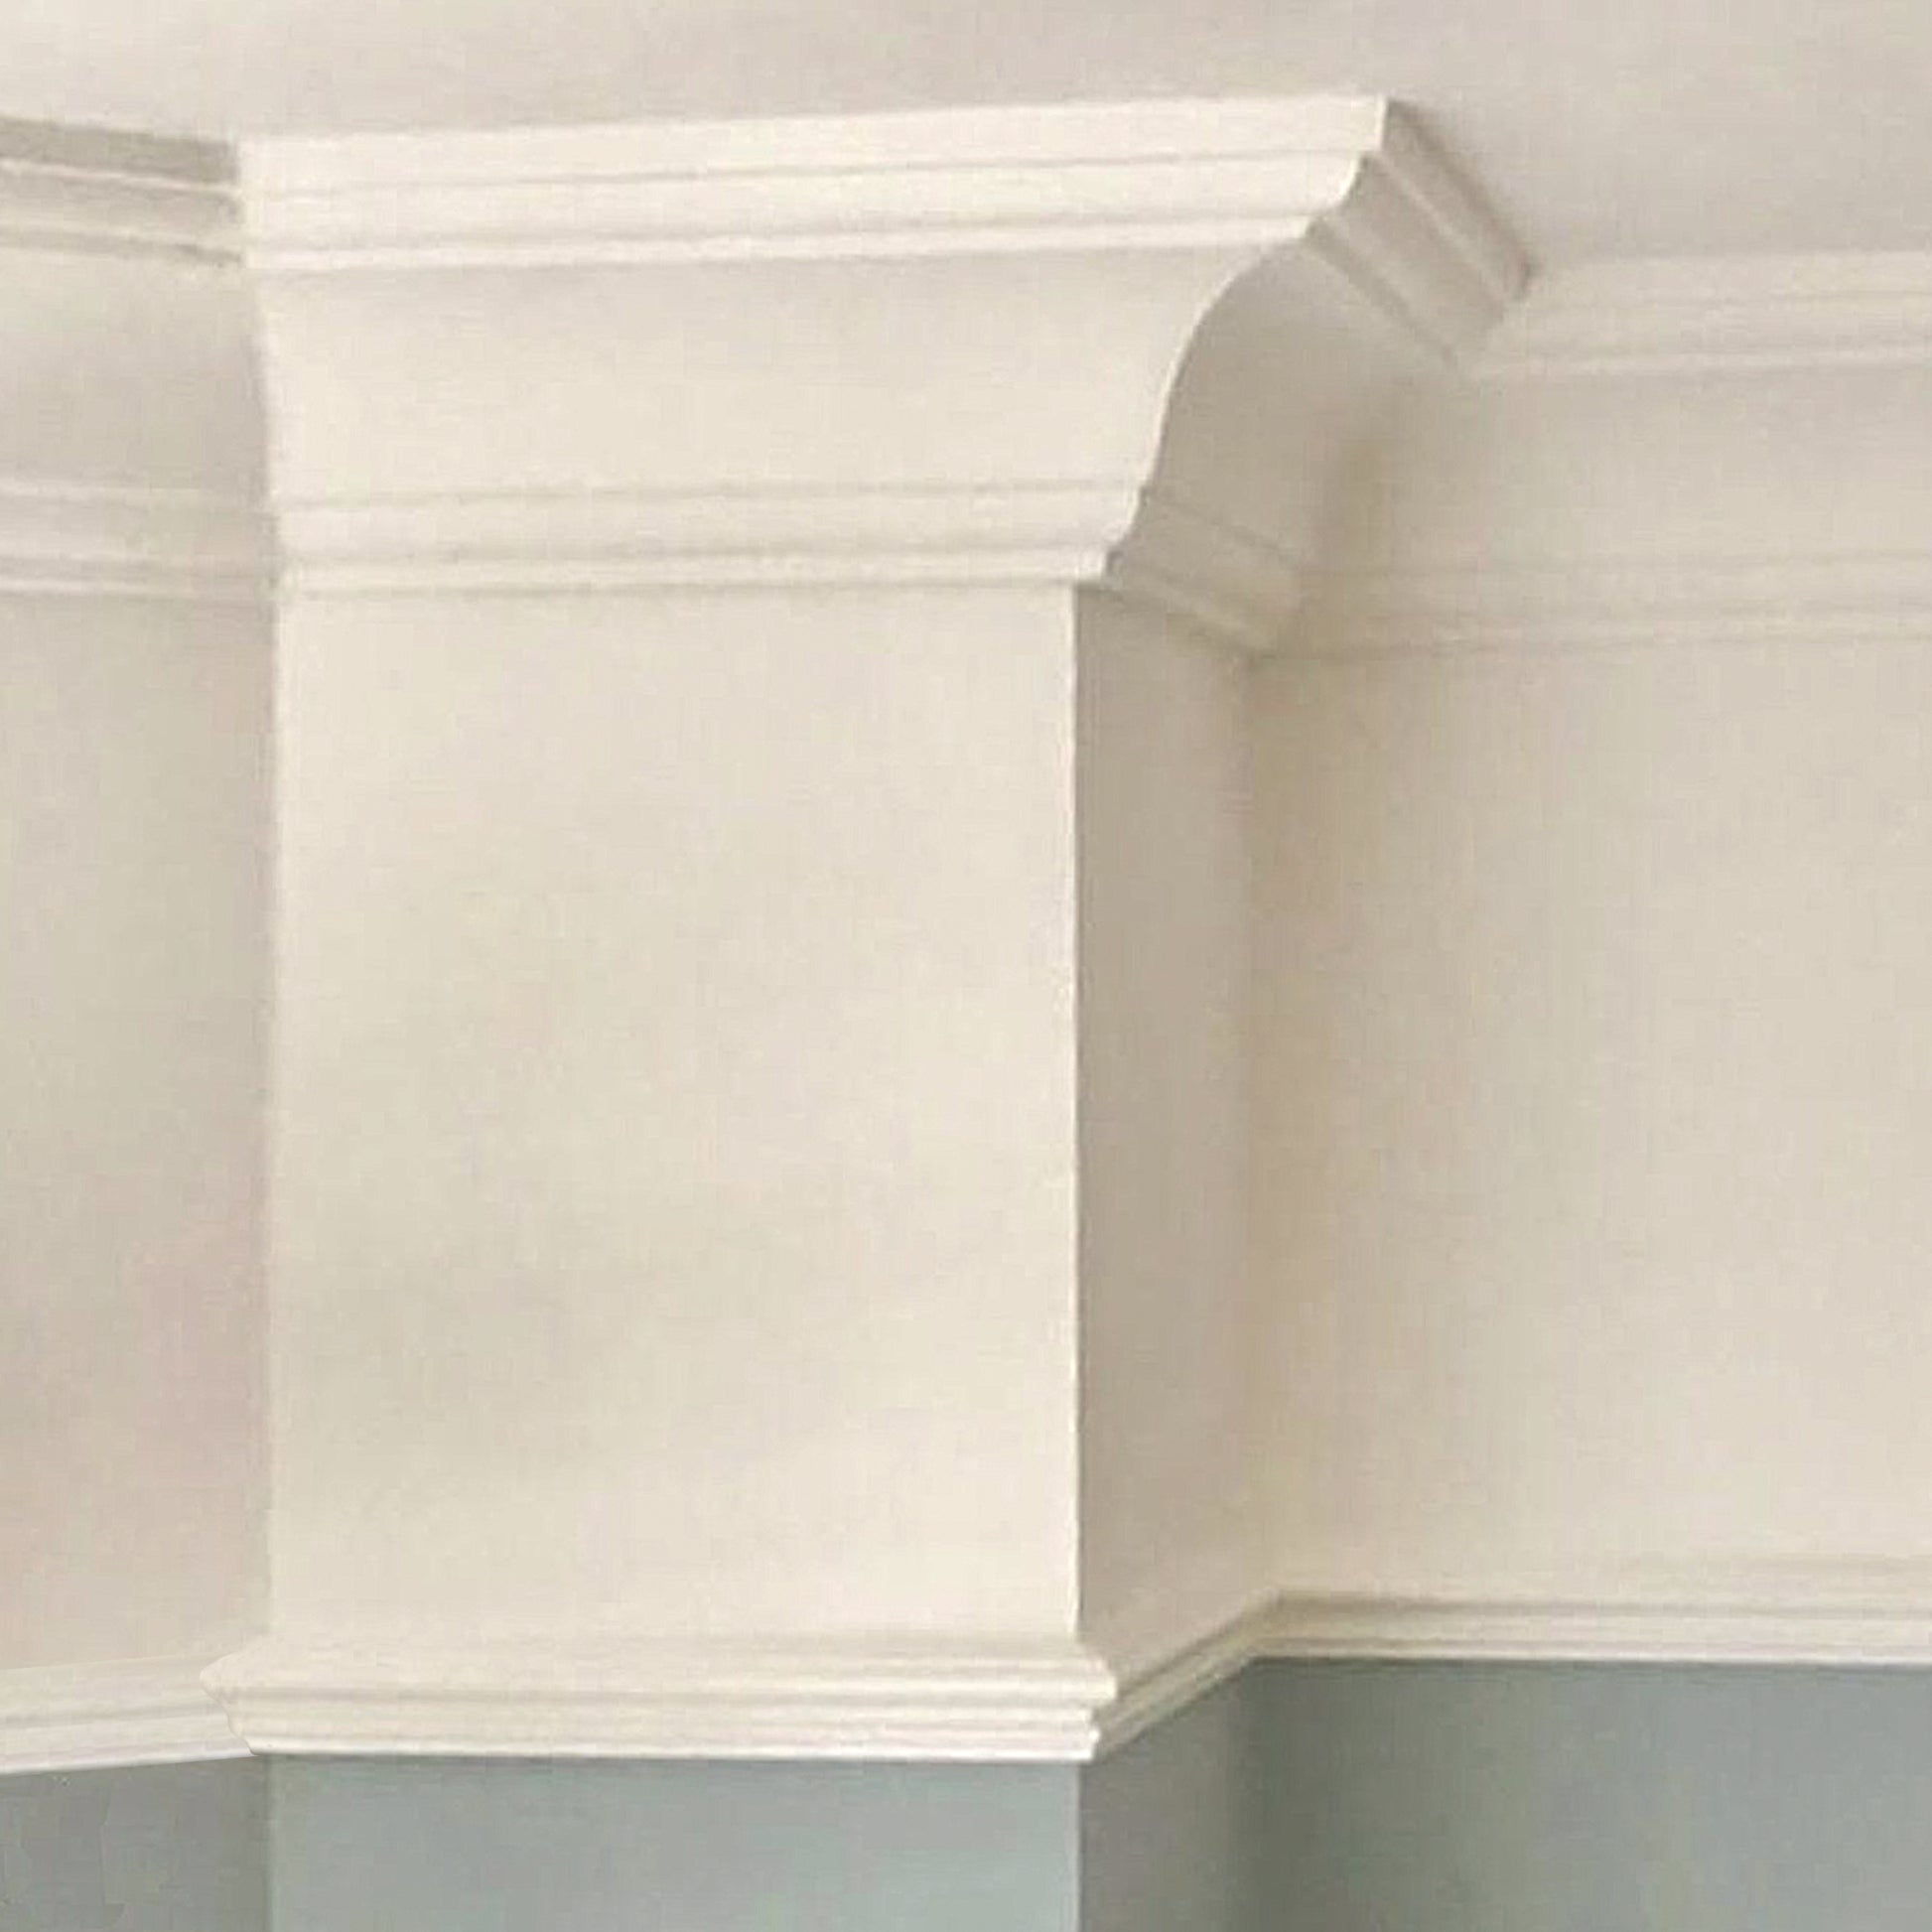 Plain Run coving on blue and white wall